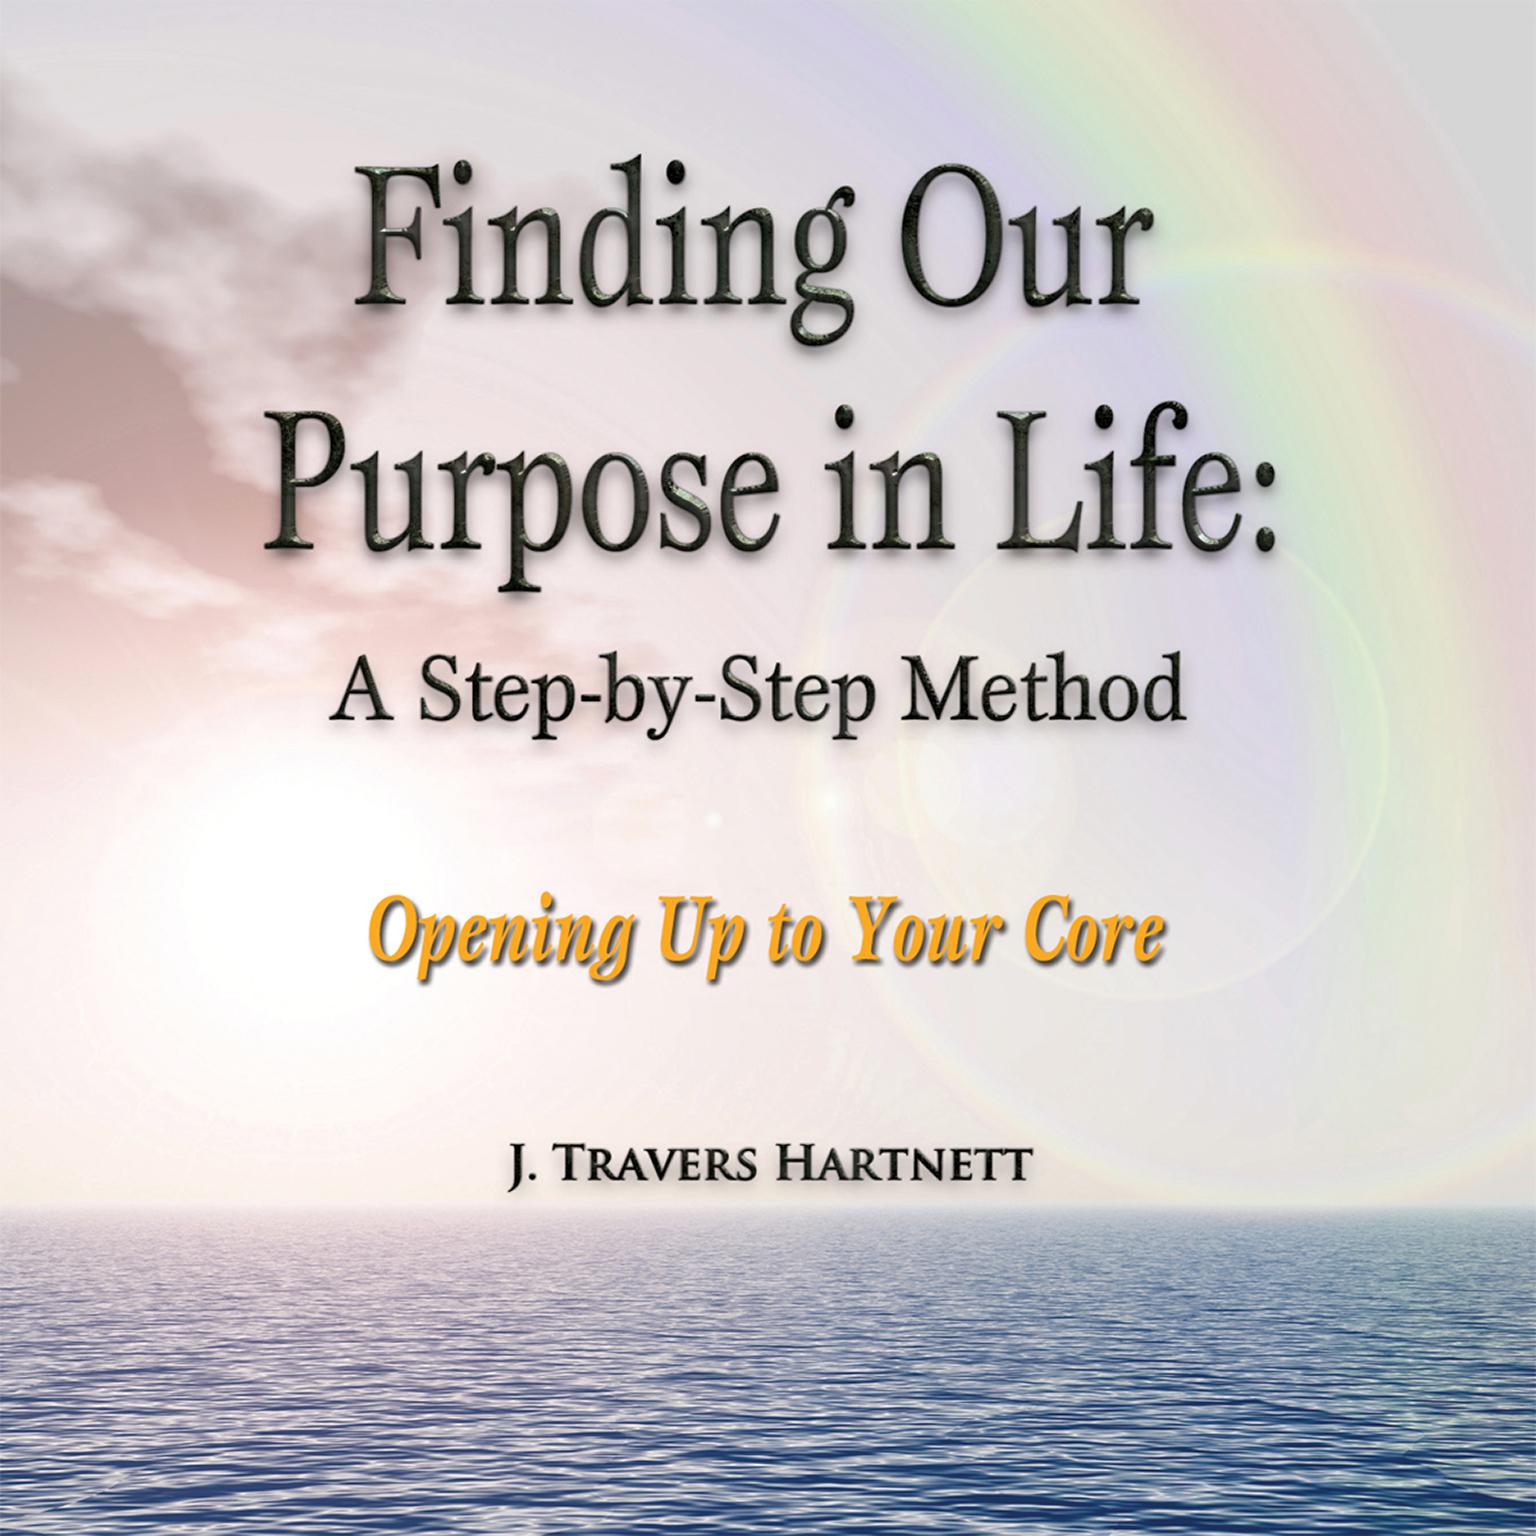 Finding Our Purpose in Life: A Step-by-Step Method: Opening Up to Your Core Audiobook, by J. Travers Hartnett